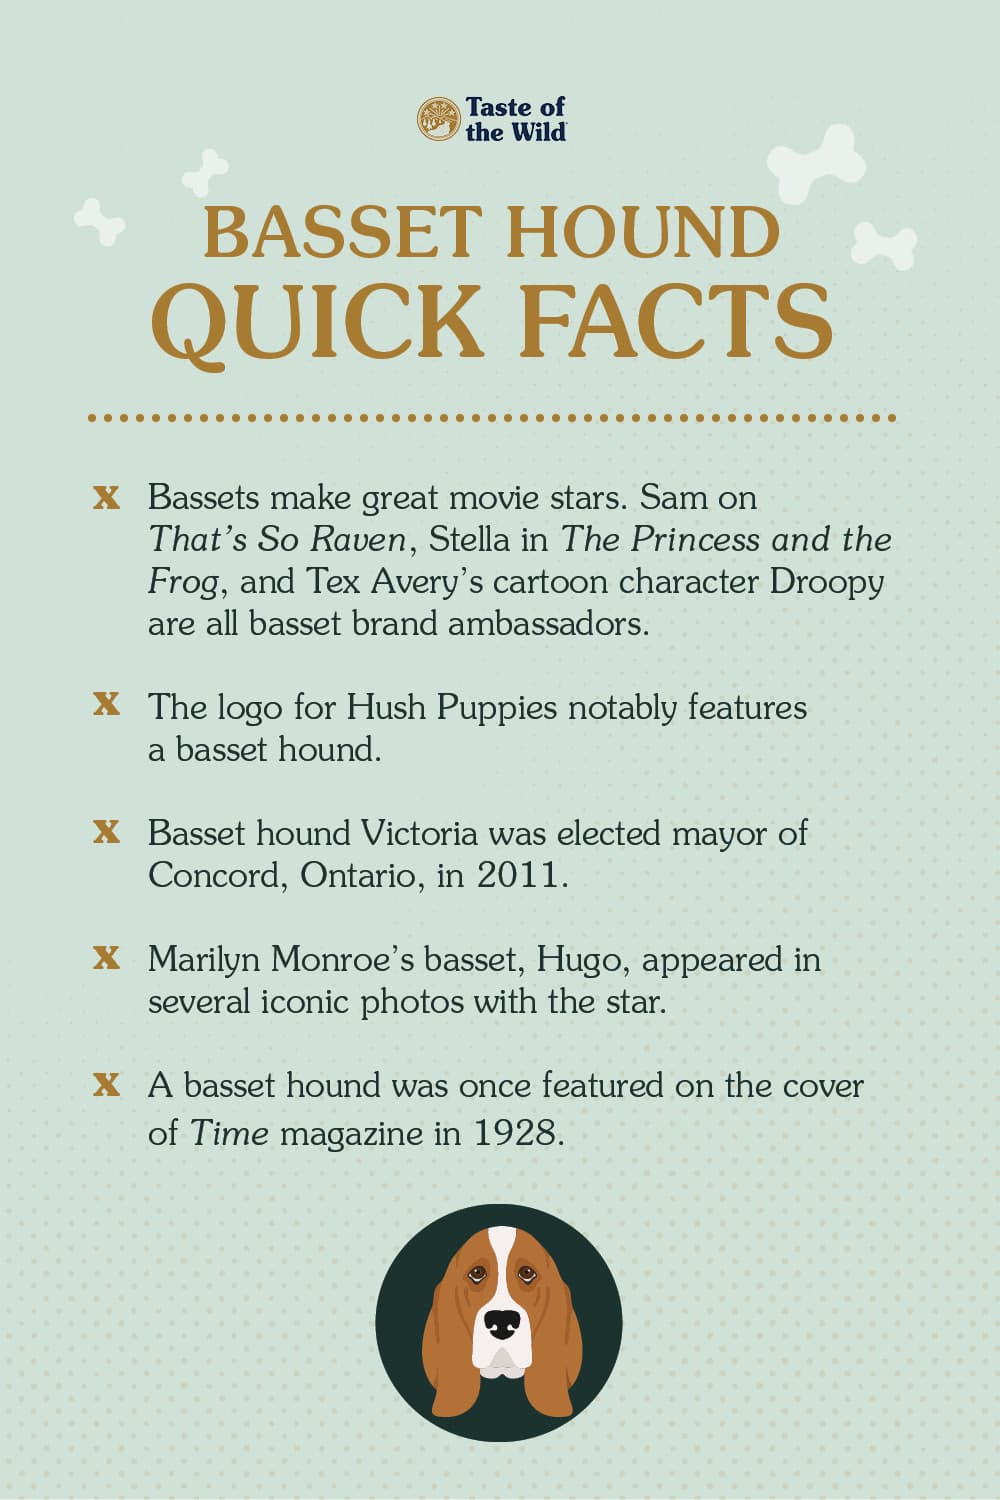 An interior graphic detailing five quick facts about basset hounds.